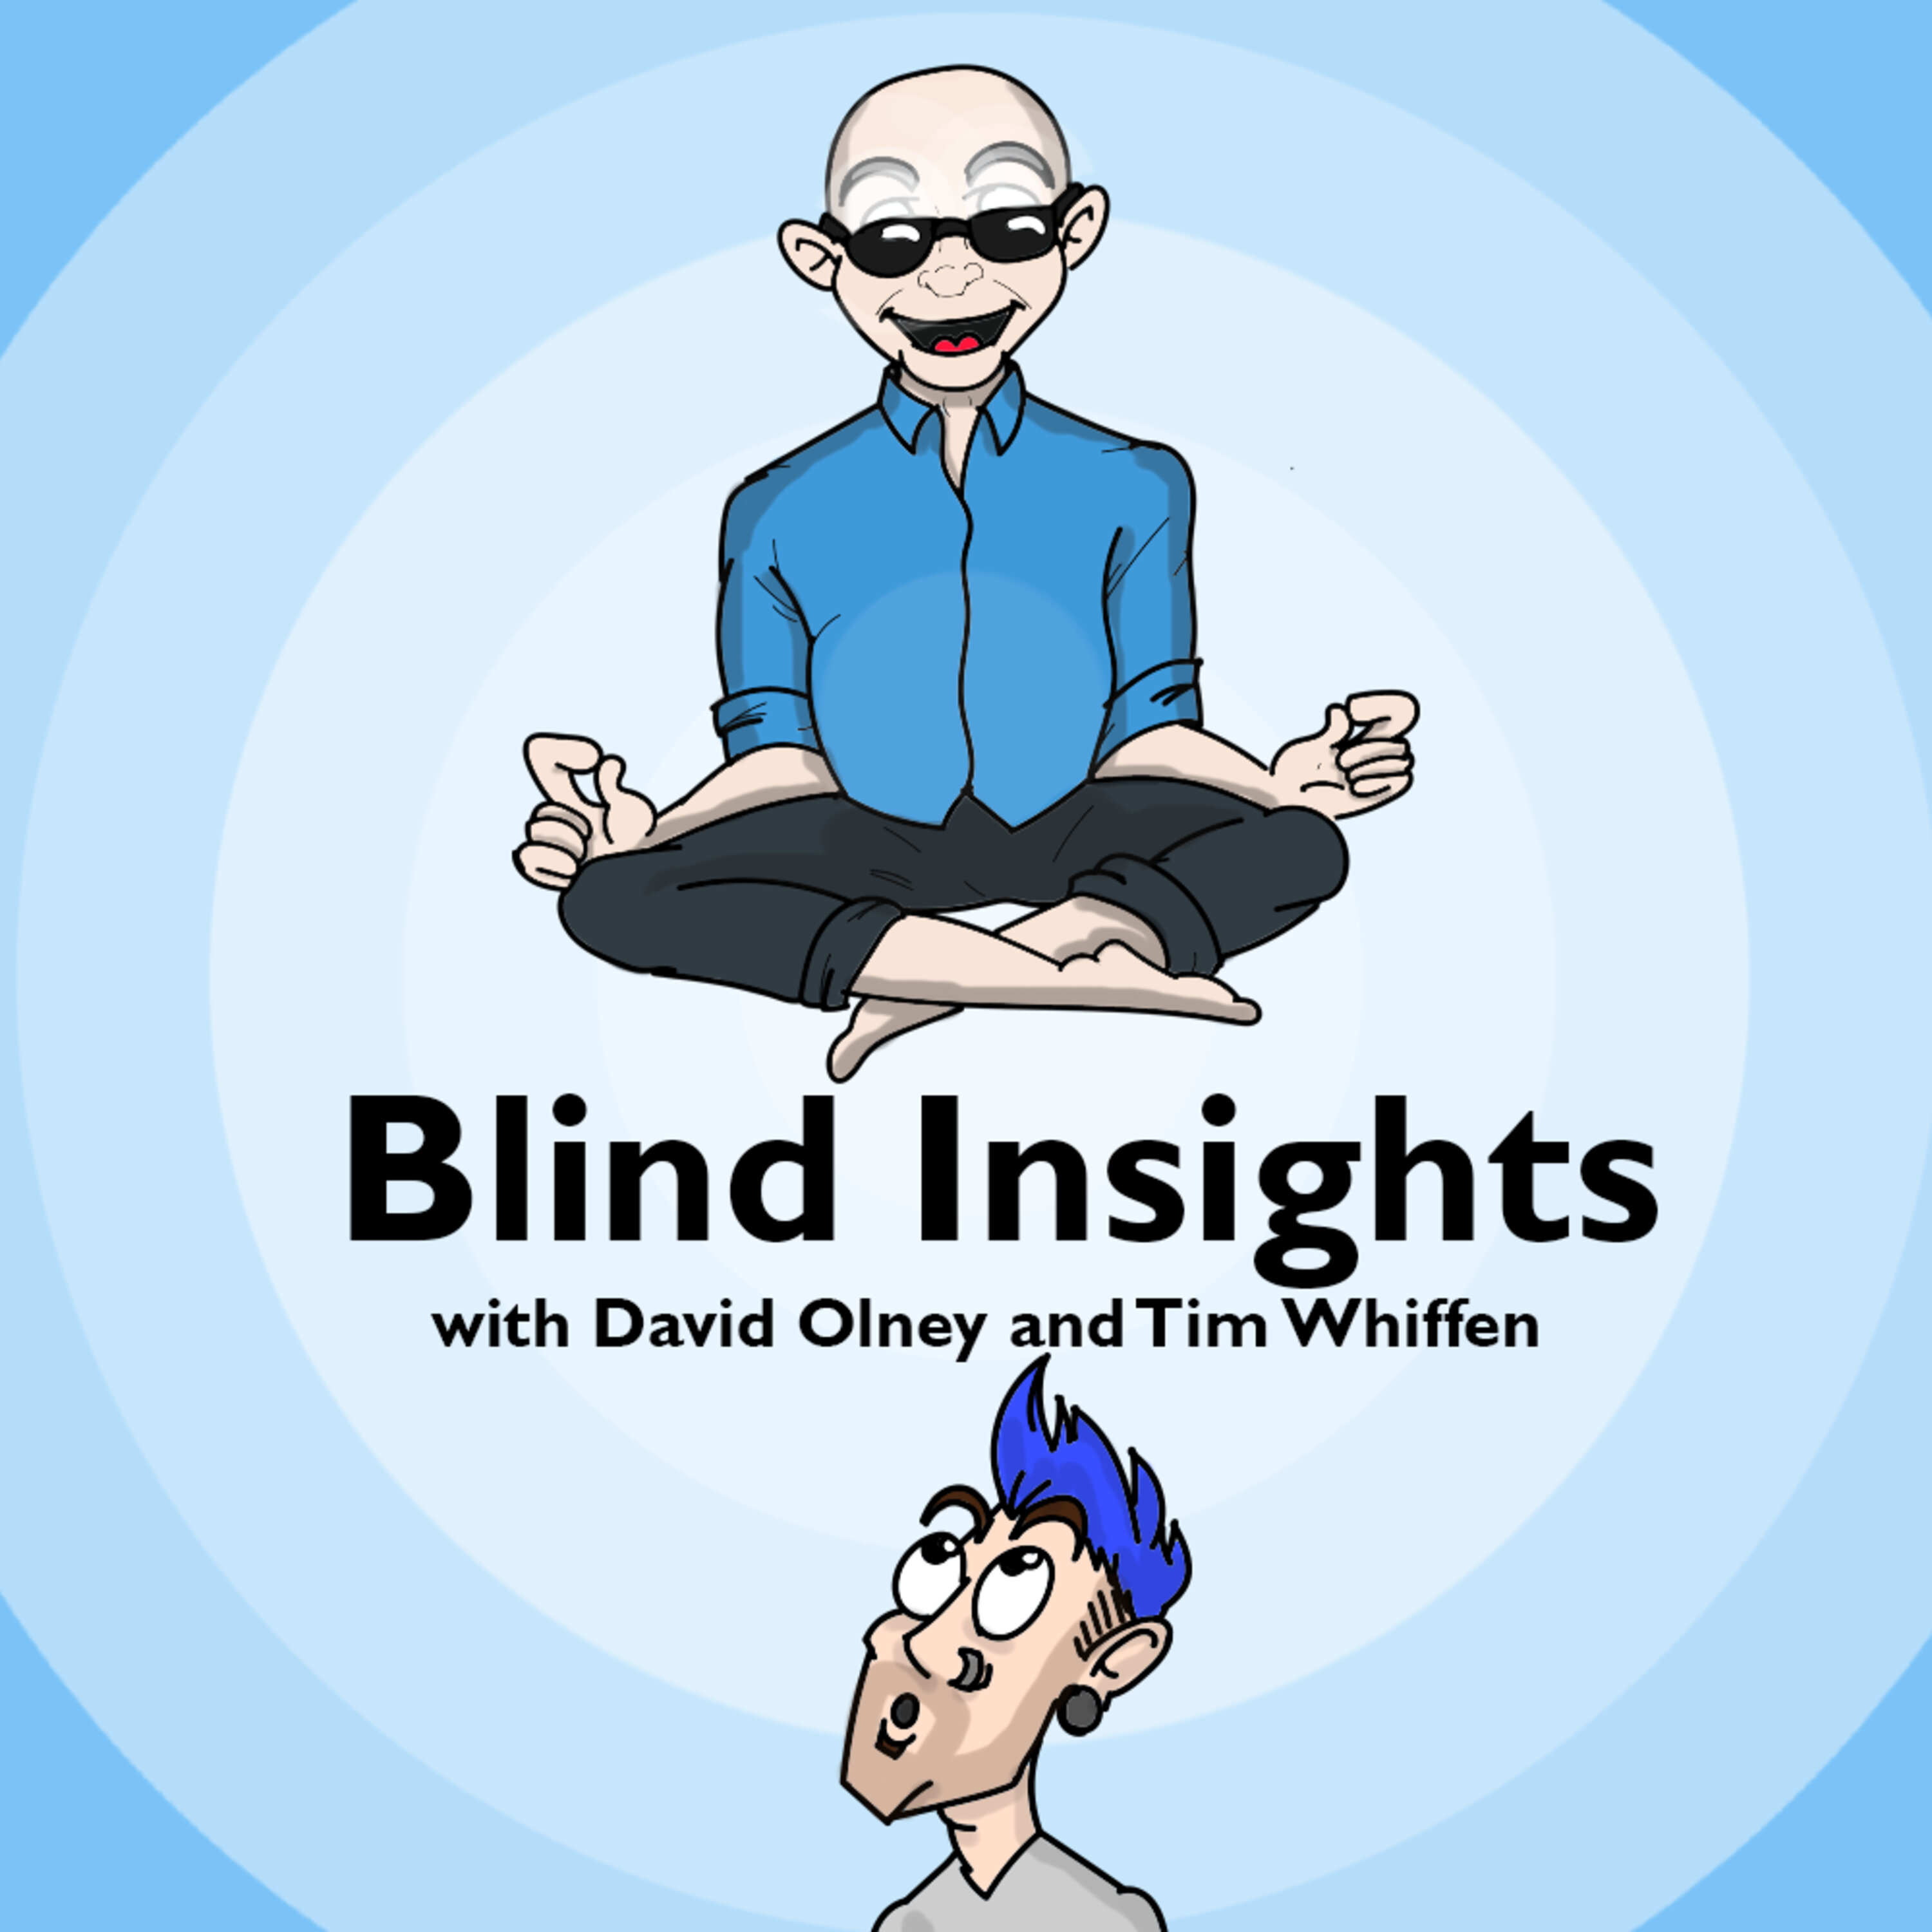 Blind Insights - Communication and Media